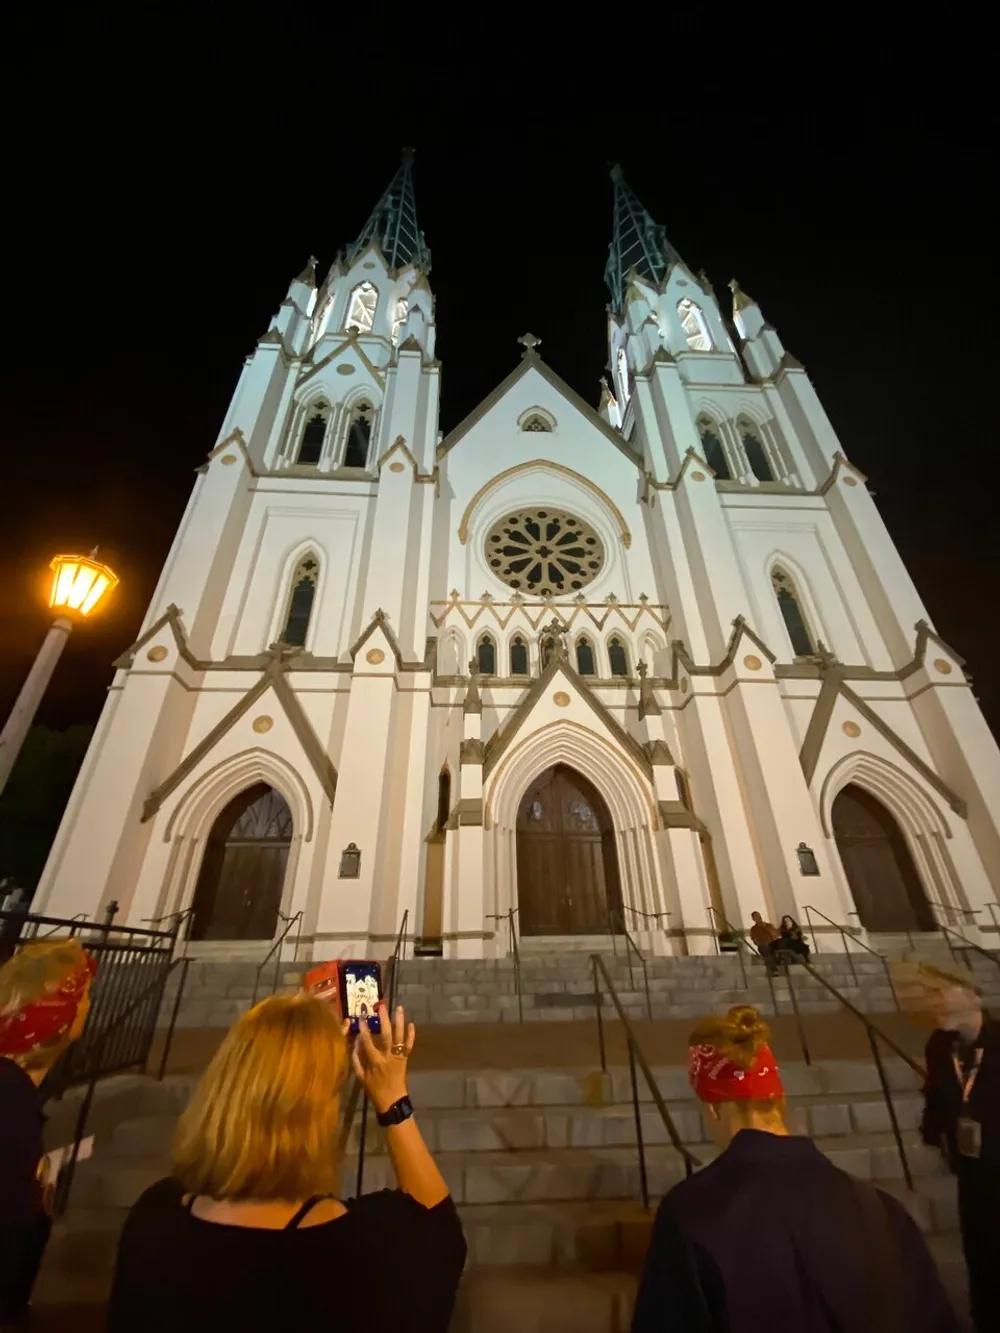 Several people are standing in front of a grand illuminated Gothic-style church at night while one person takes a photo of the intricate facade with their smartphone